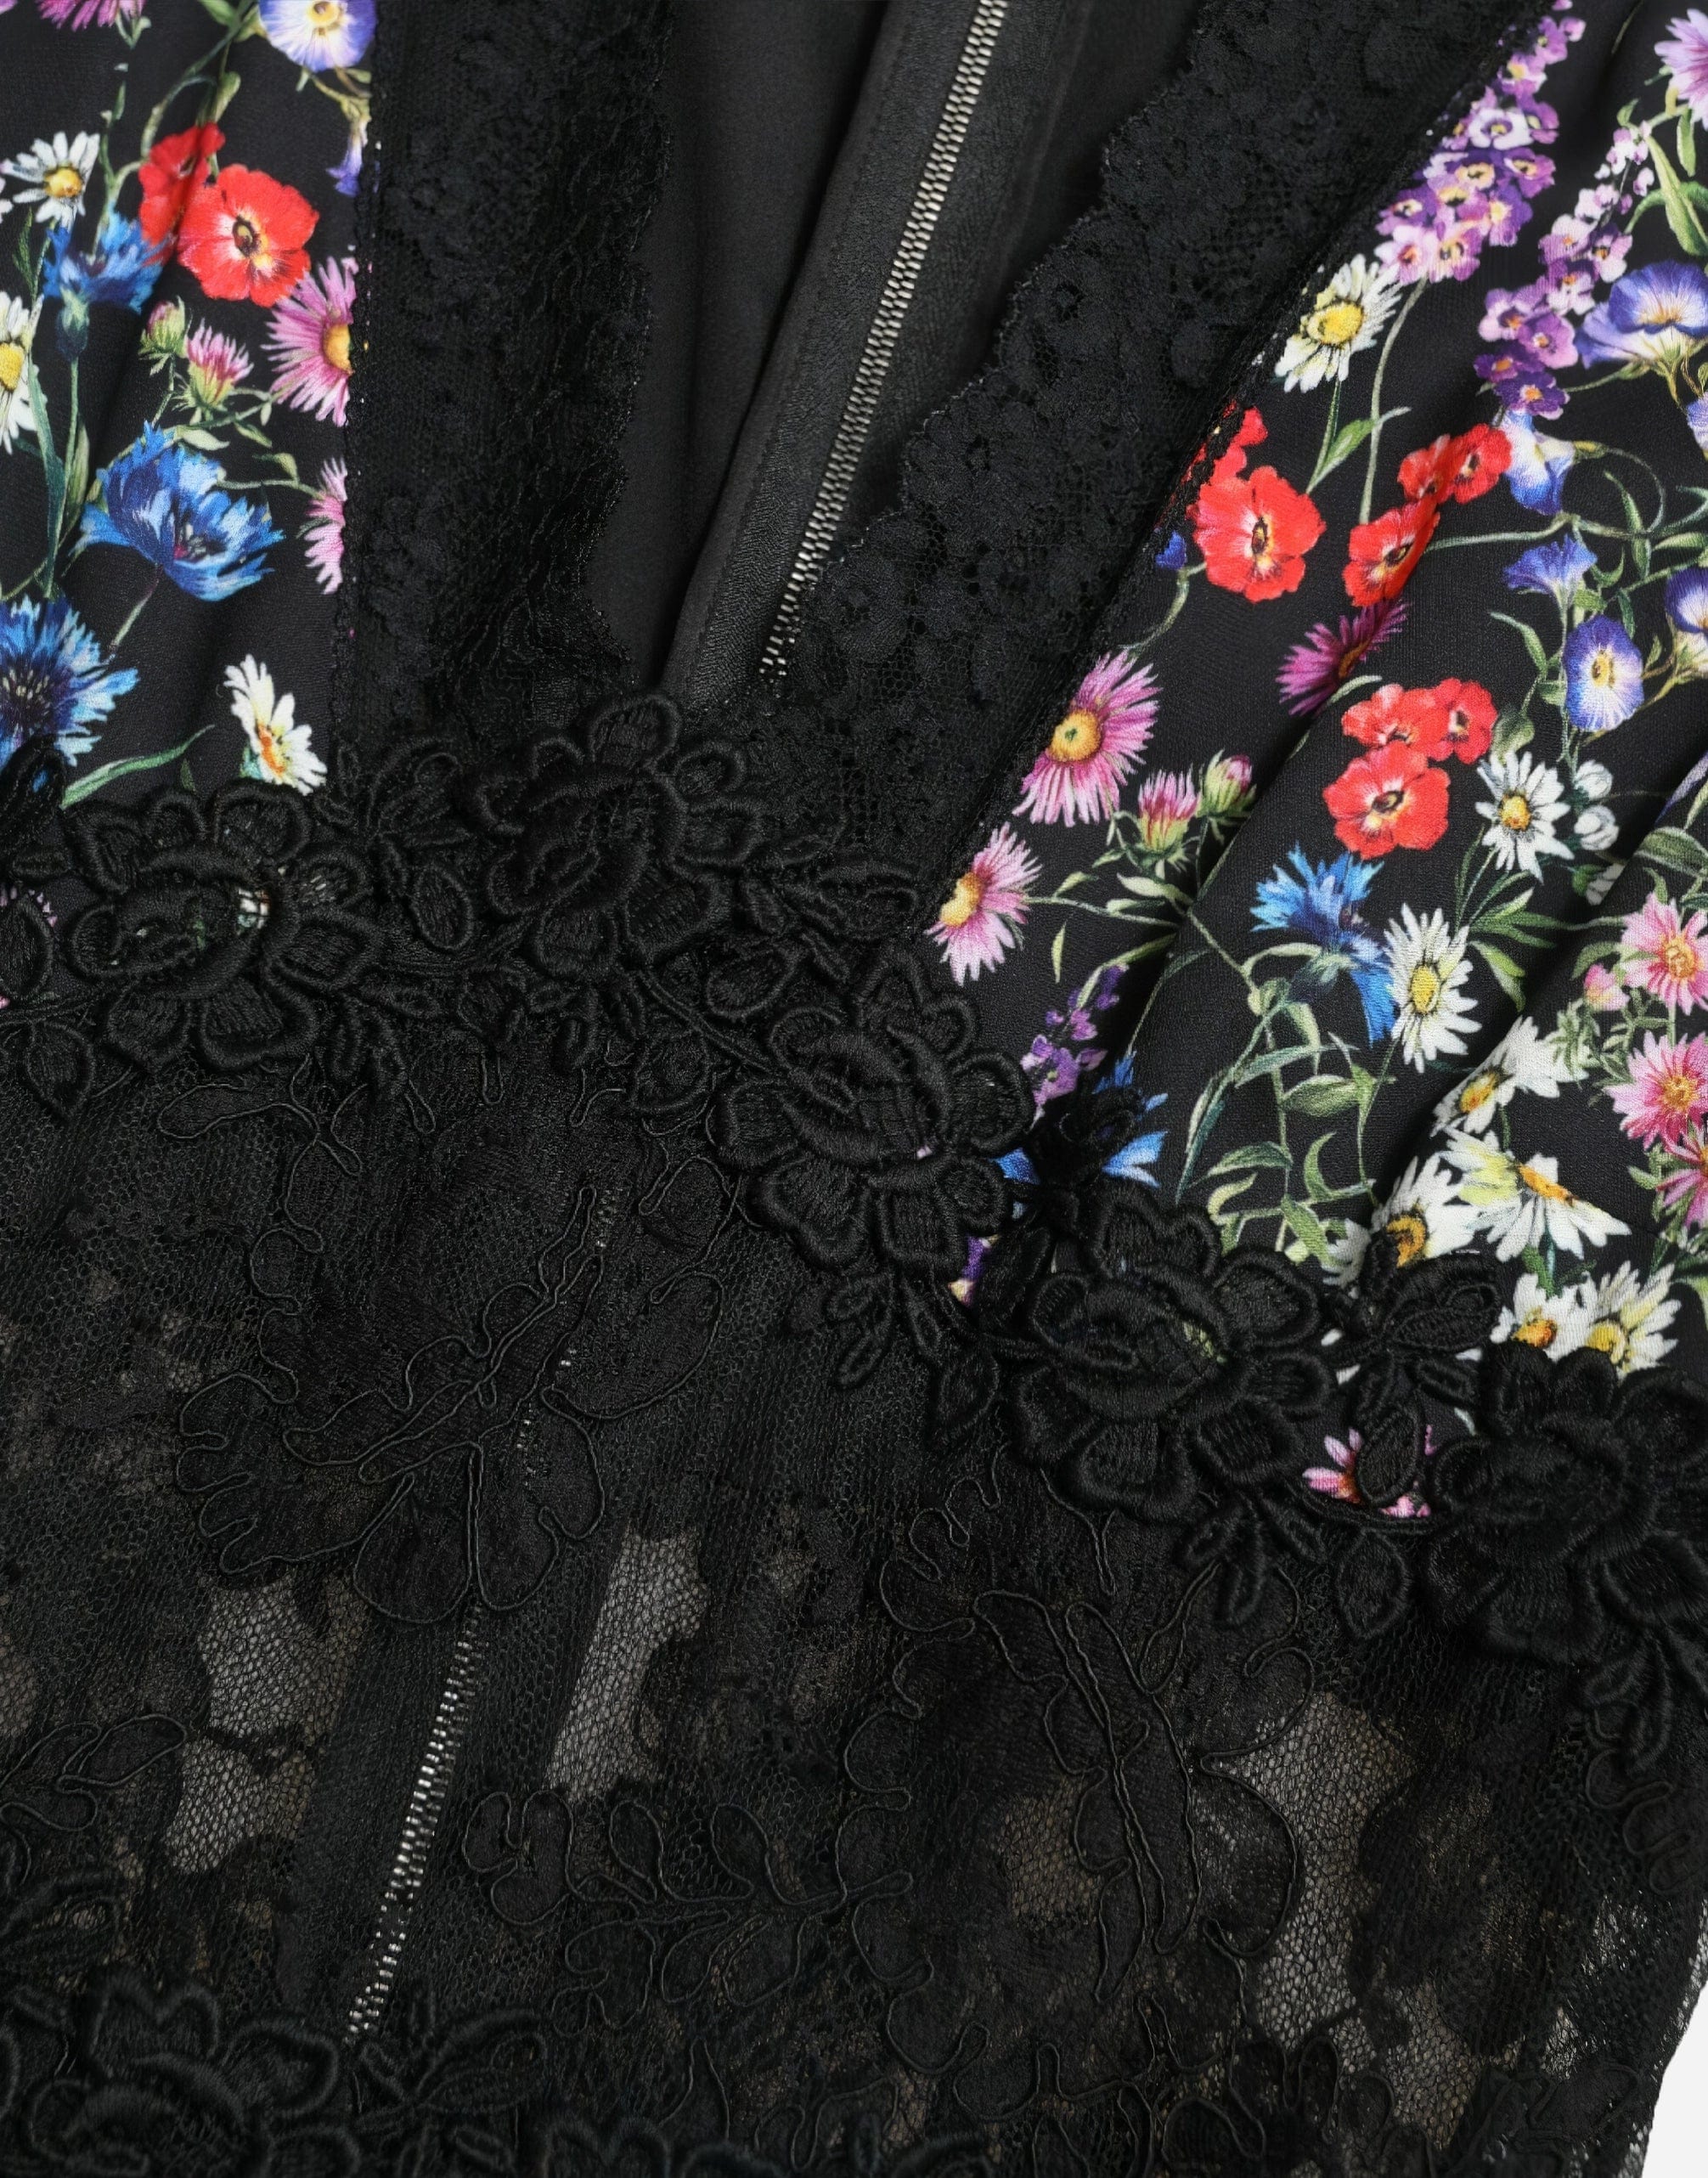 Dolce & Gabbana Stretch Lace With Floral Print Dress